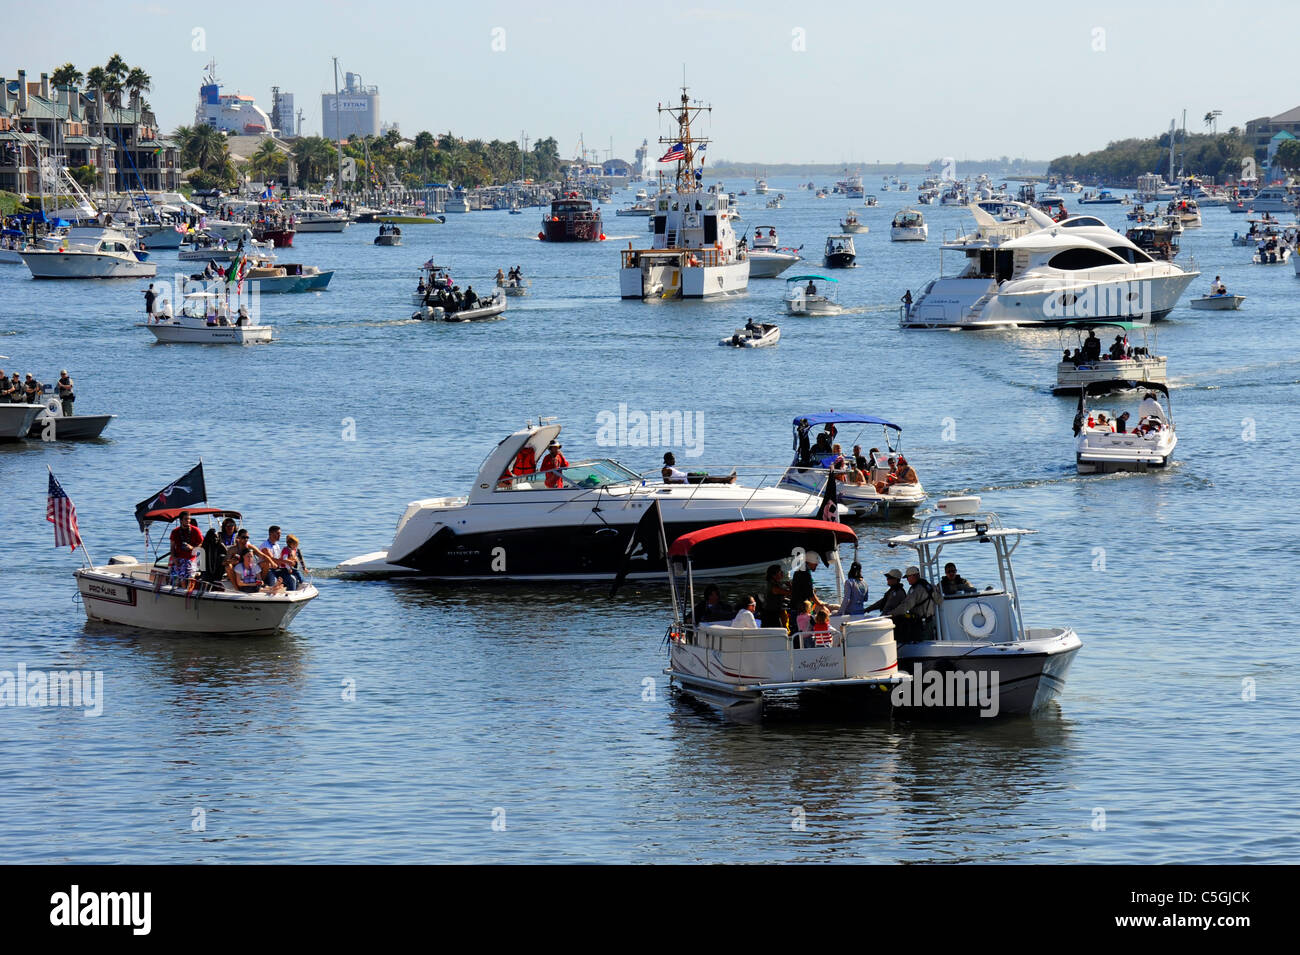 Crowd with boats downtown Tampa Gasparilla Pirate Festival Stock Photo